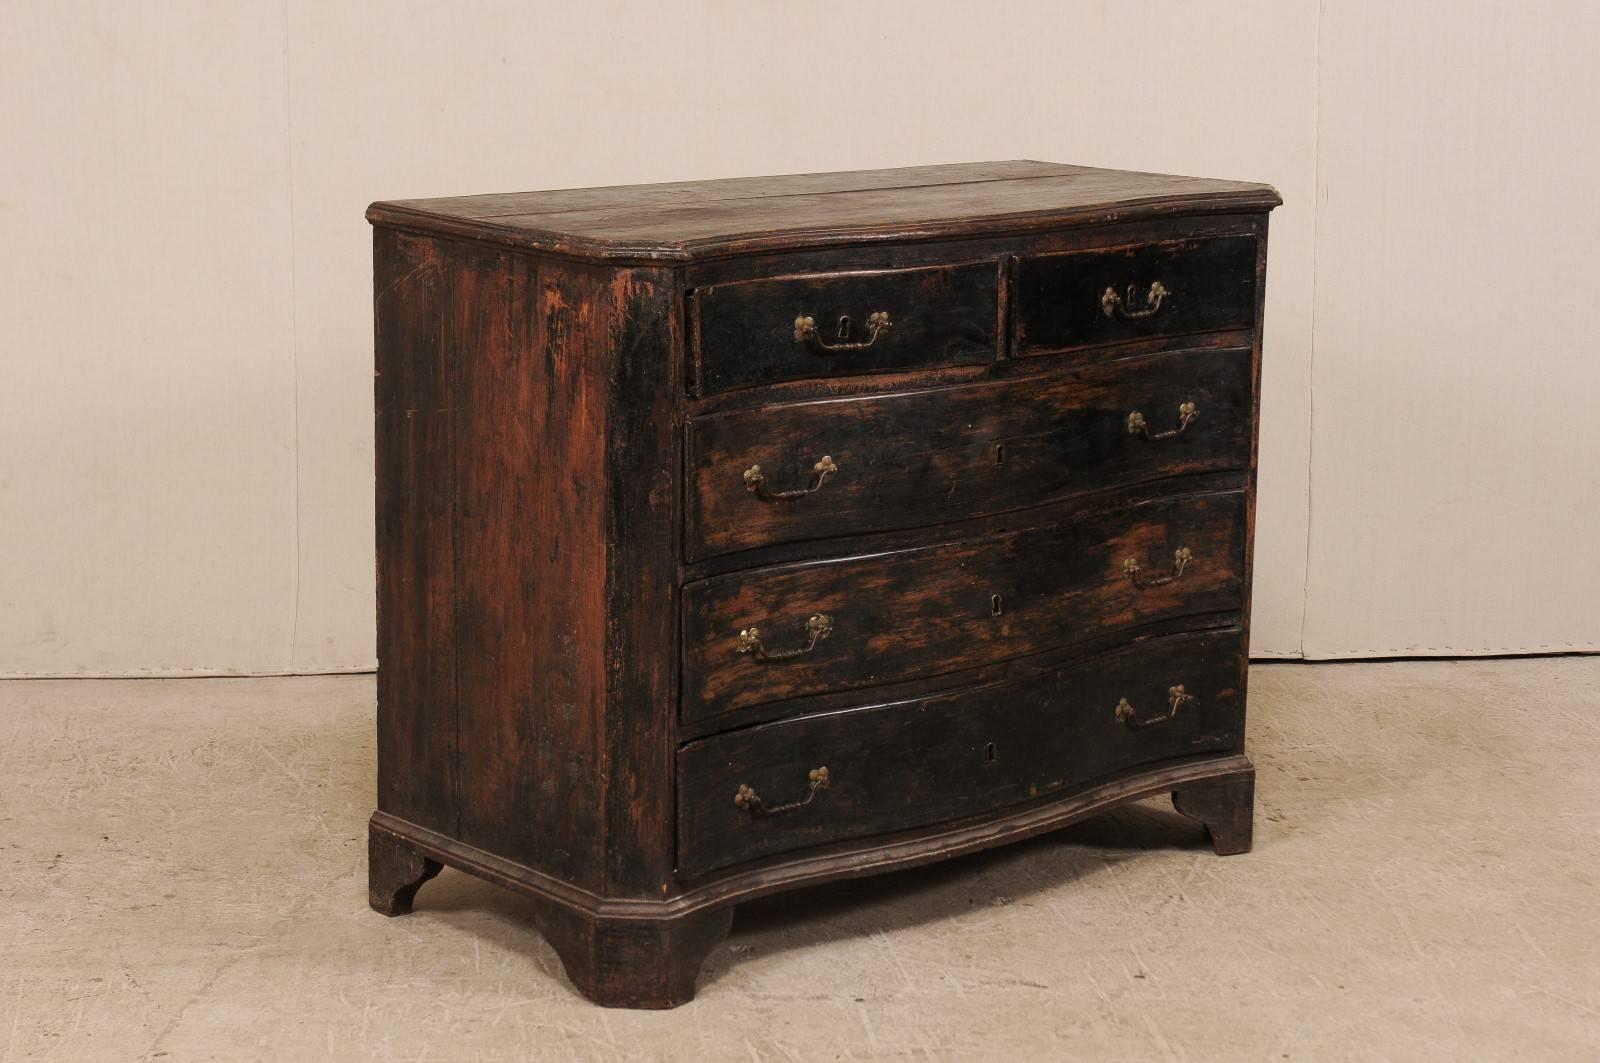 Carved 18th Century Italian Five-Drawer Wood Chest in Rich Dark Brown